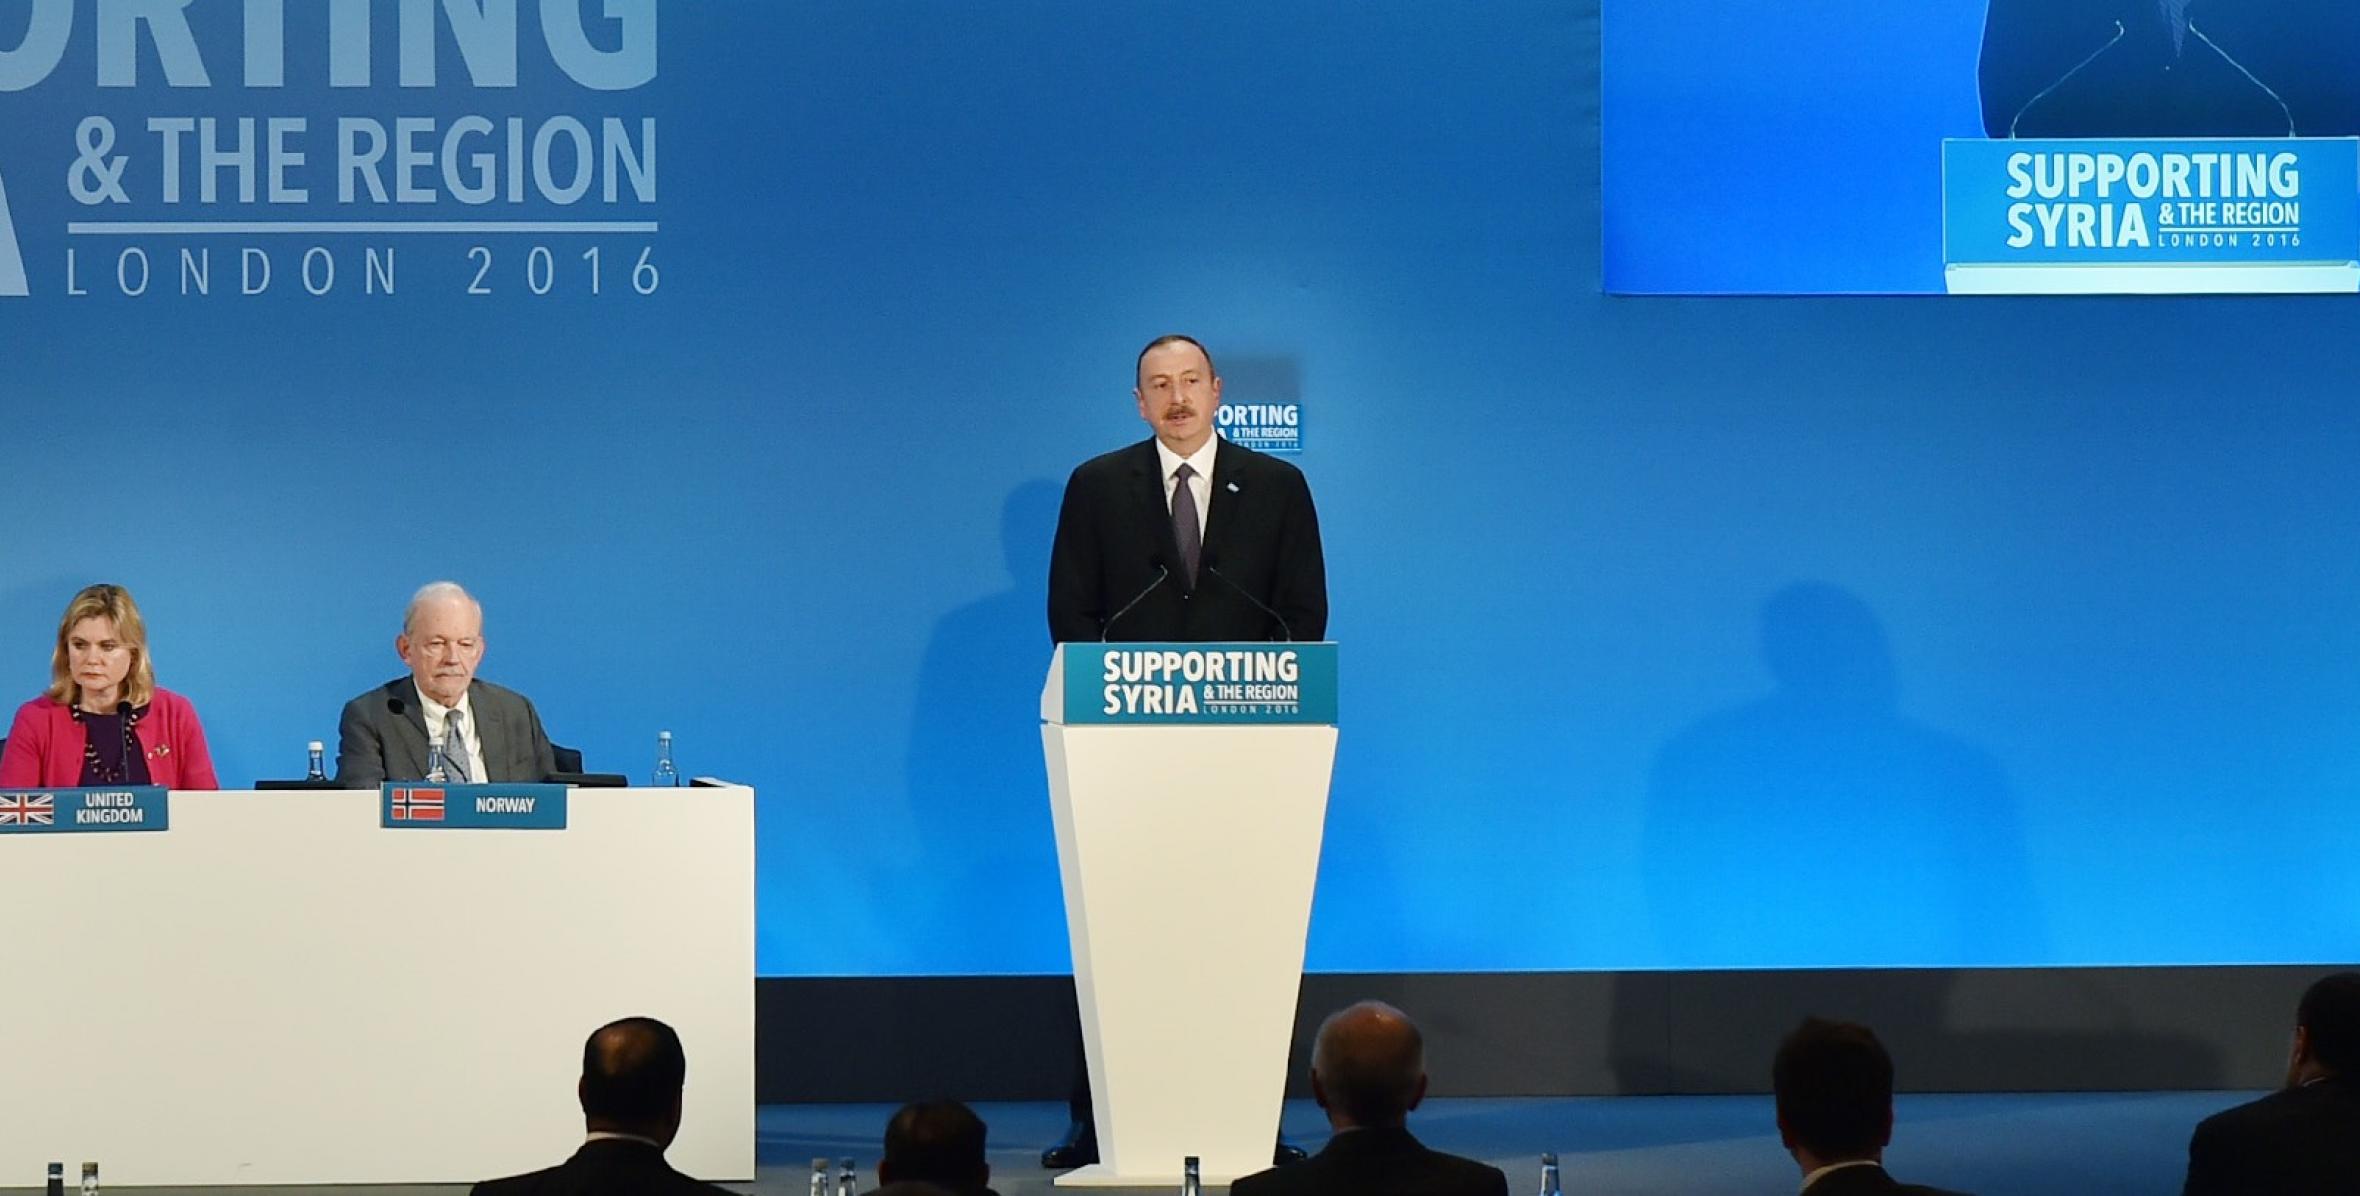 Speech by Ilham Aliyev at the "Supporting Syria and the Region Conference" in London